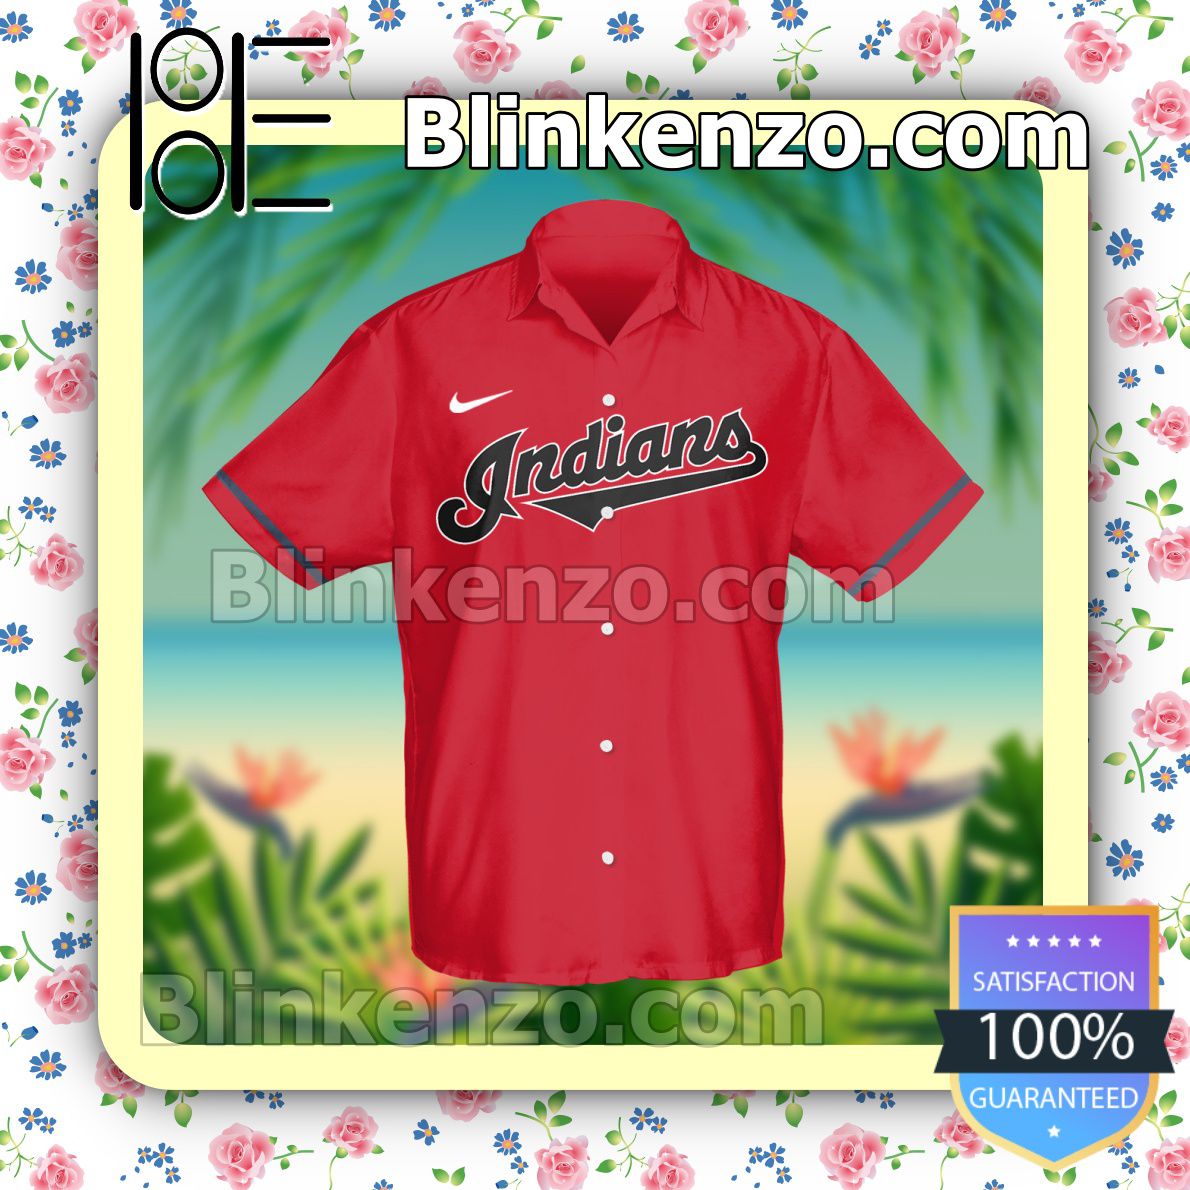 Cleveland Indians MLB Flower Hawaiian Shirt Special Gift For Men And Women  Fans - Freedomdesign